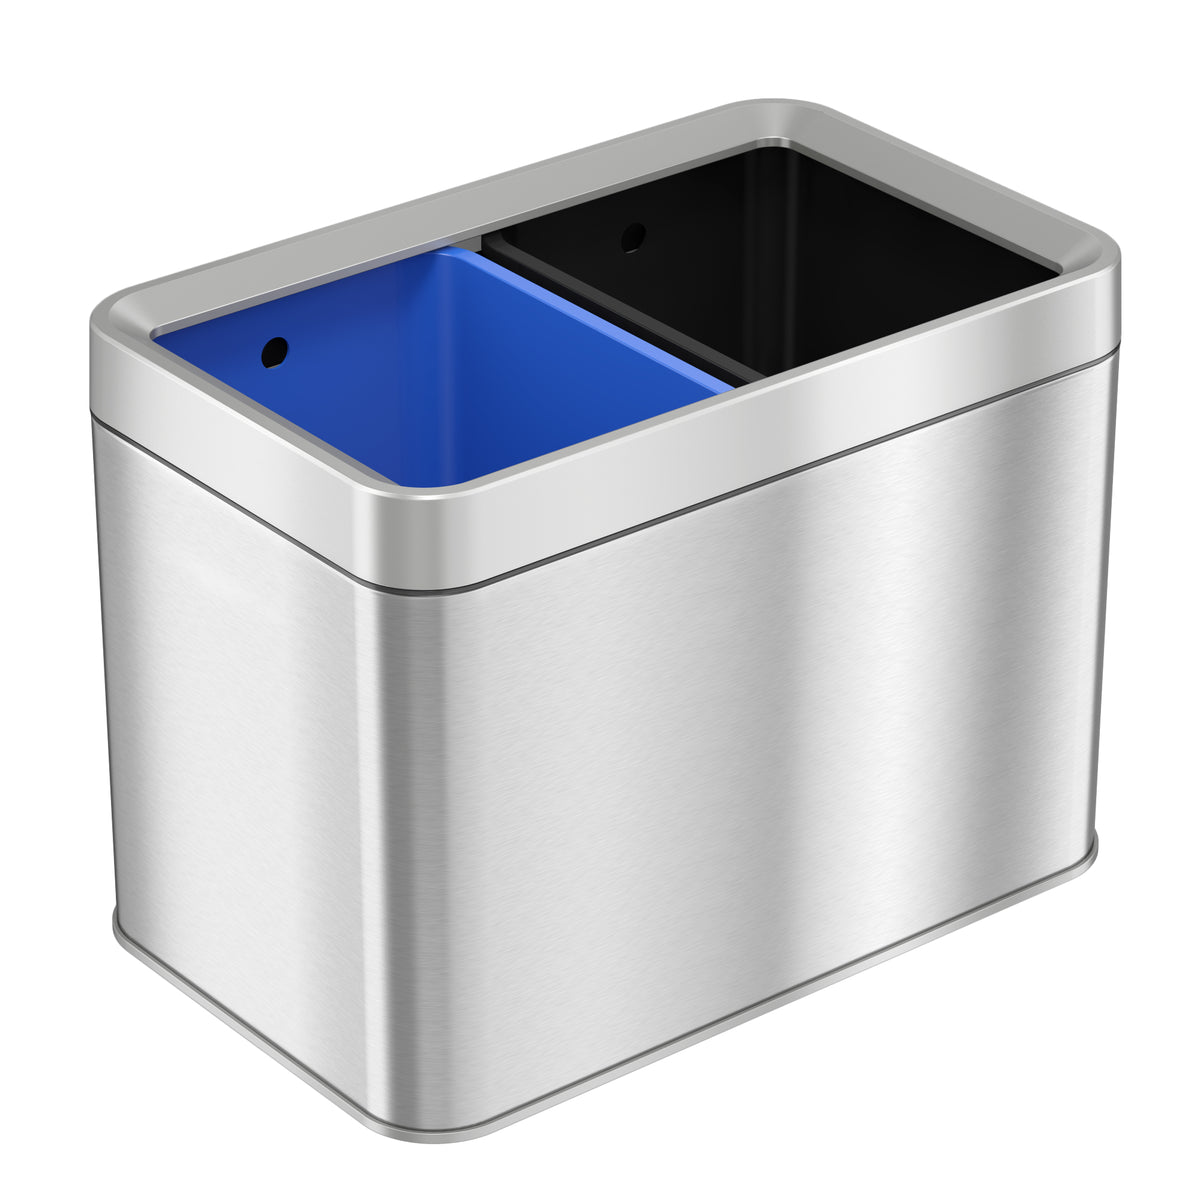 1.6 Gallon / 6.1 Liter Titanium Stainless Steel Compost Bin – iTouchless  Housewares and Products Inc.